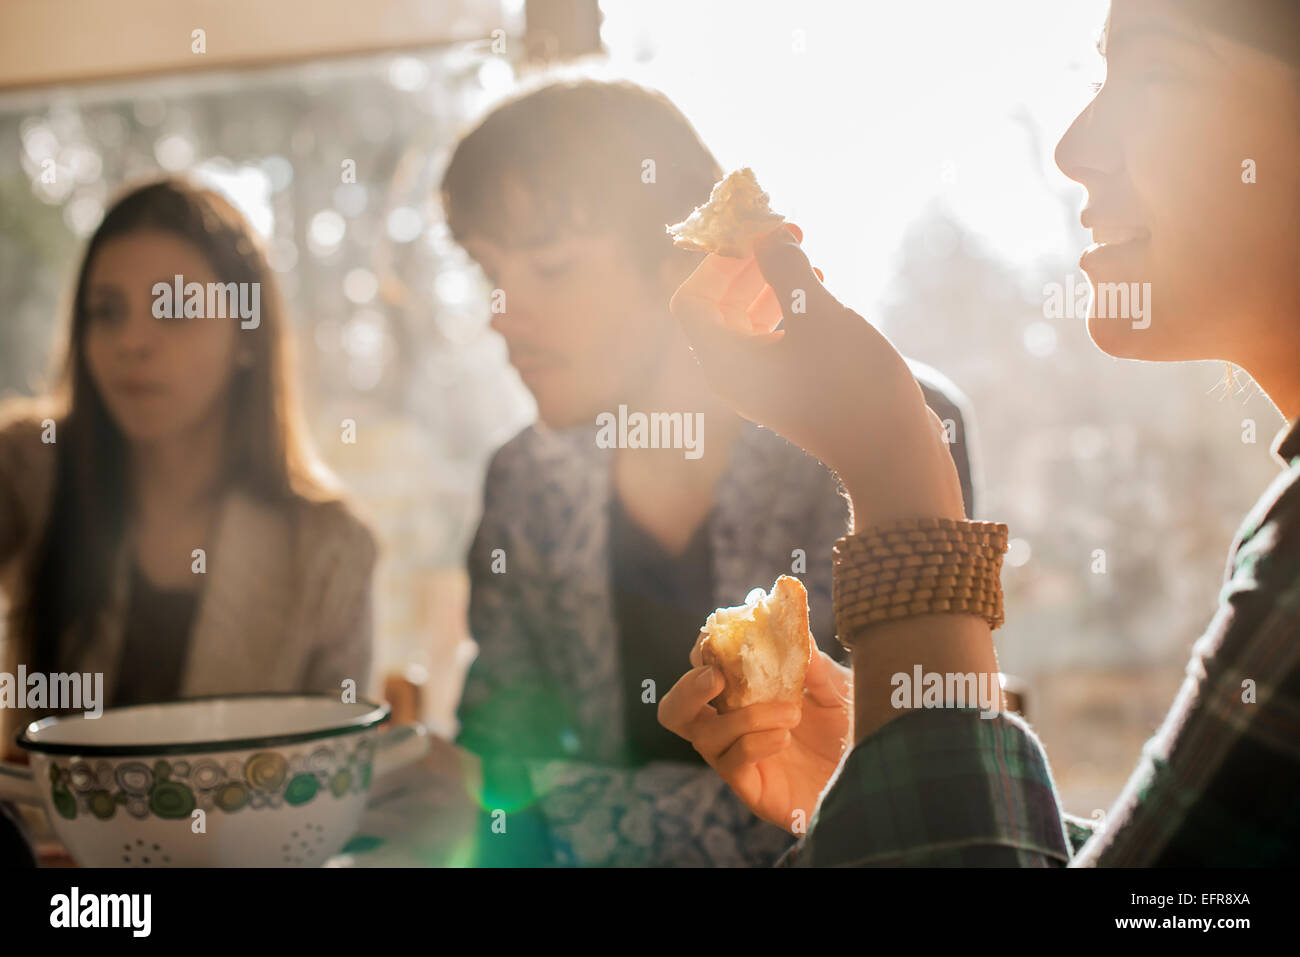 Three people sitting at a table, smiling, eating and chatting. Stock Photo